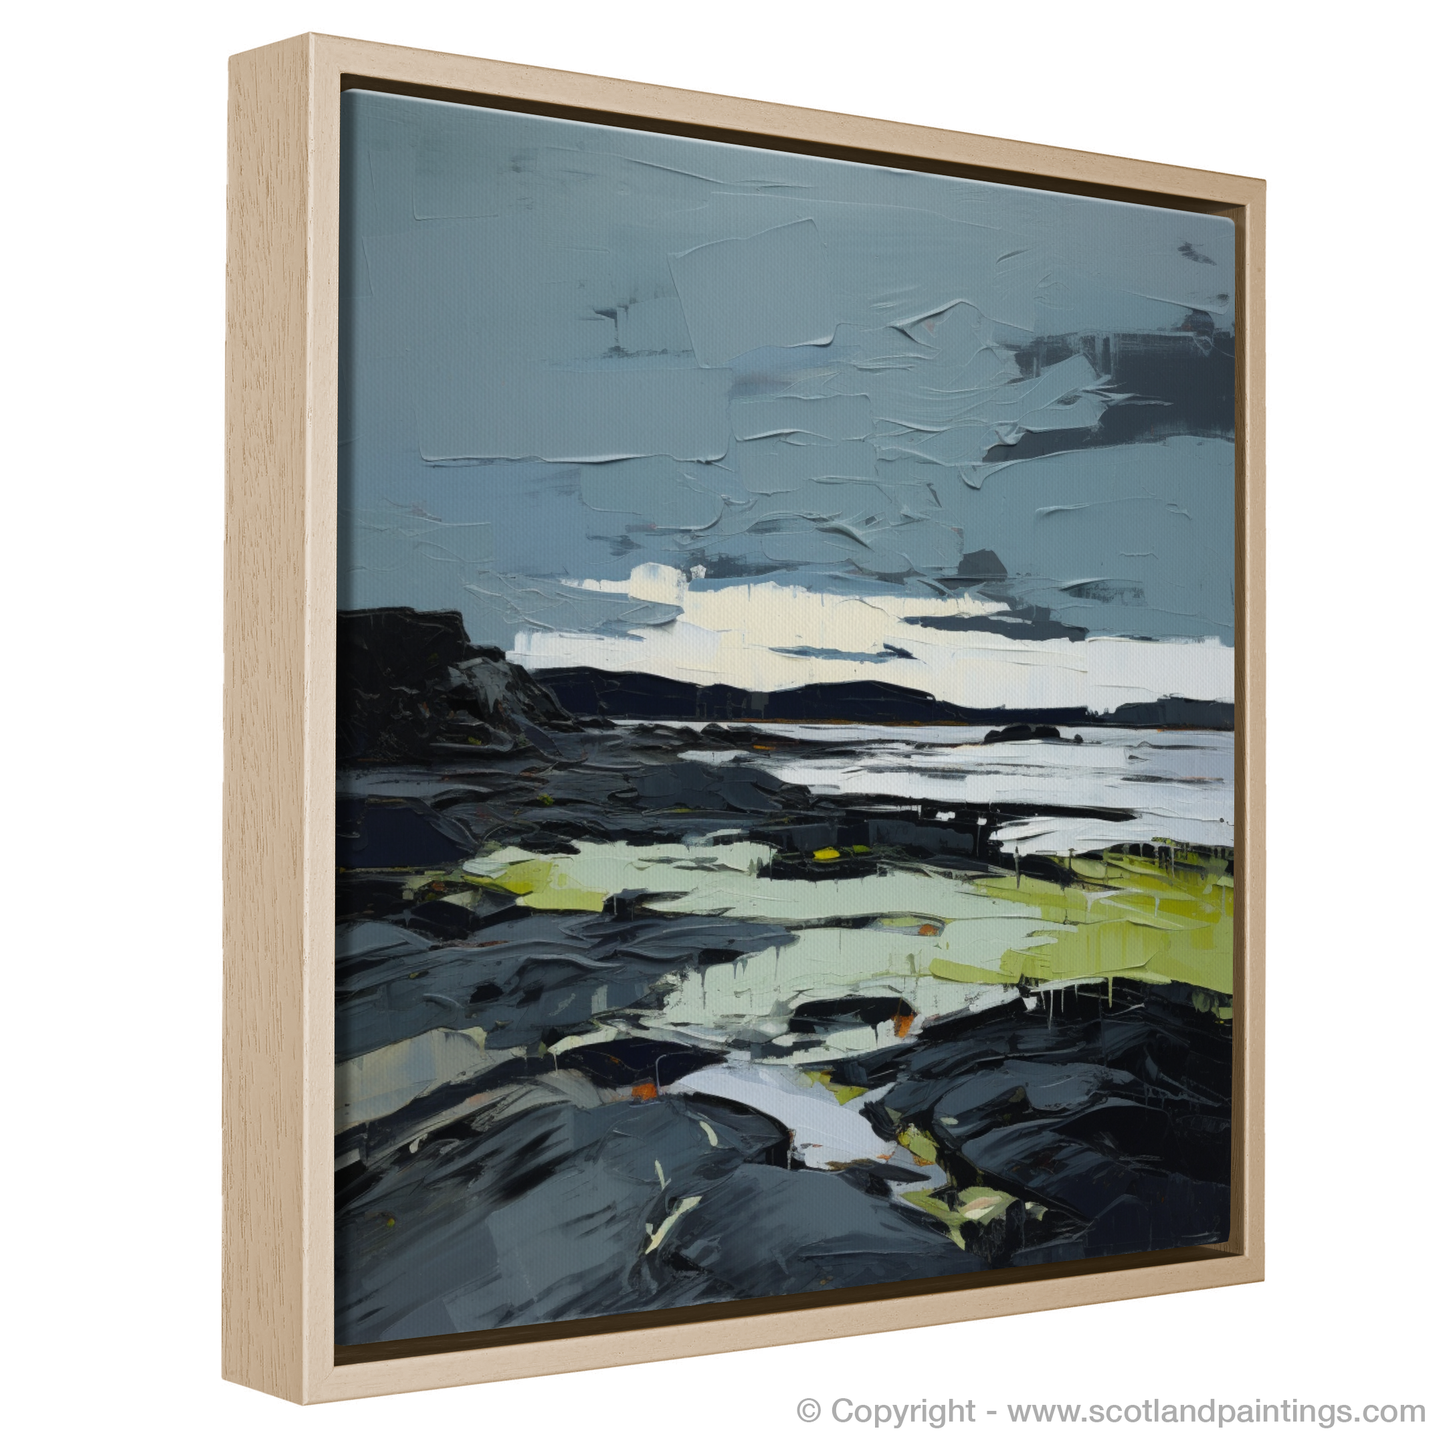 Painting and Art Print of Largo Bay, Fife entitled "Largo Bay Enigma: An Expressionist Ode to Scottish Shores".